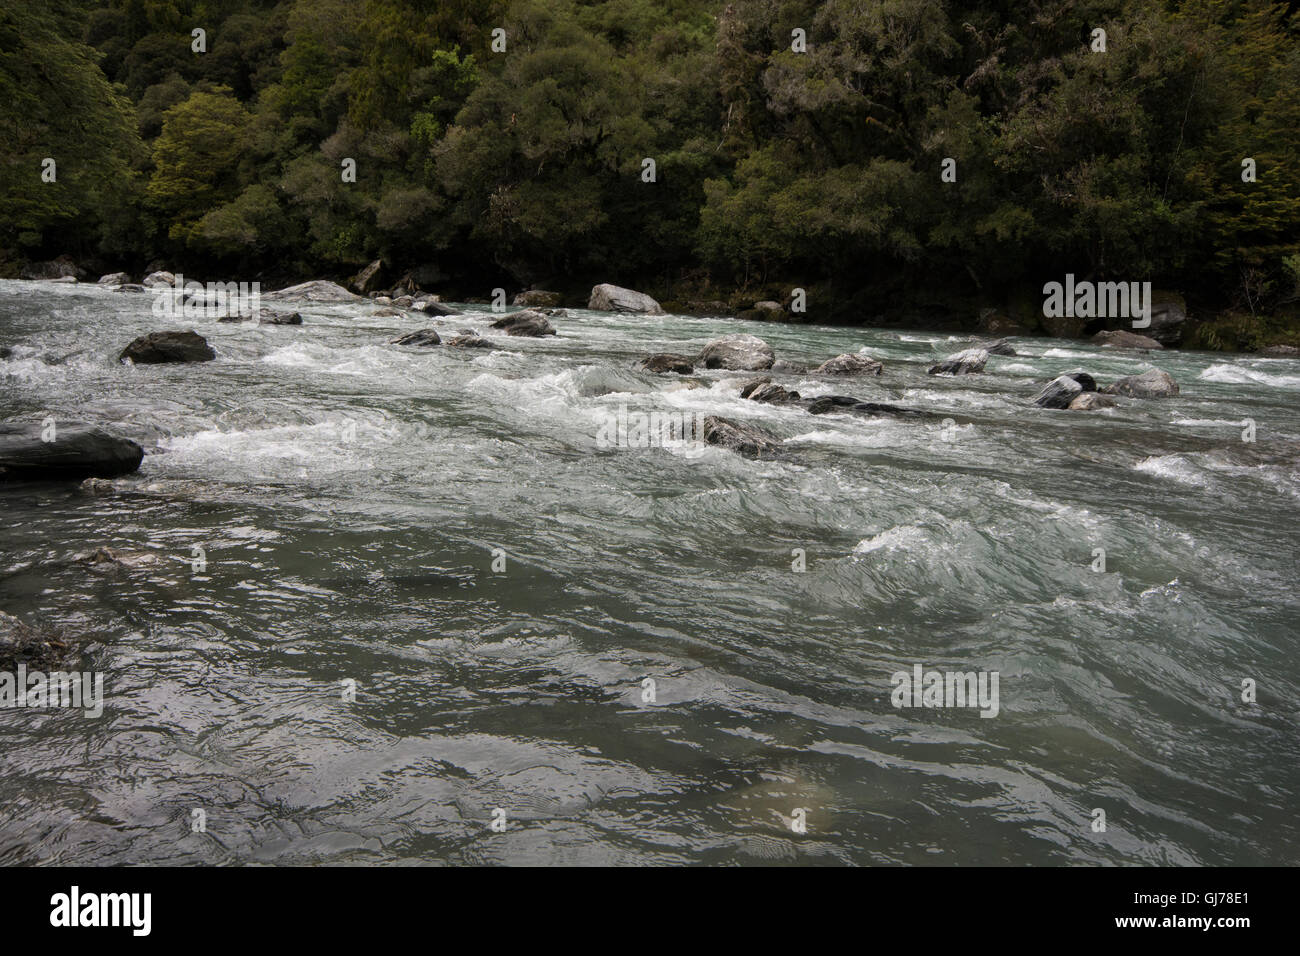 The Haast River is running as a clear mountain river in the Southern Alps of New Zealand. Stock Photo